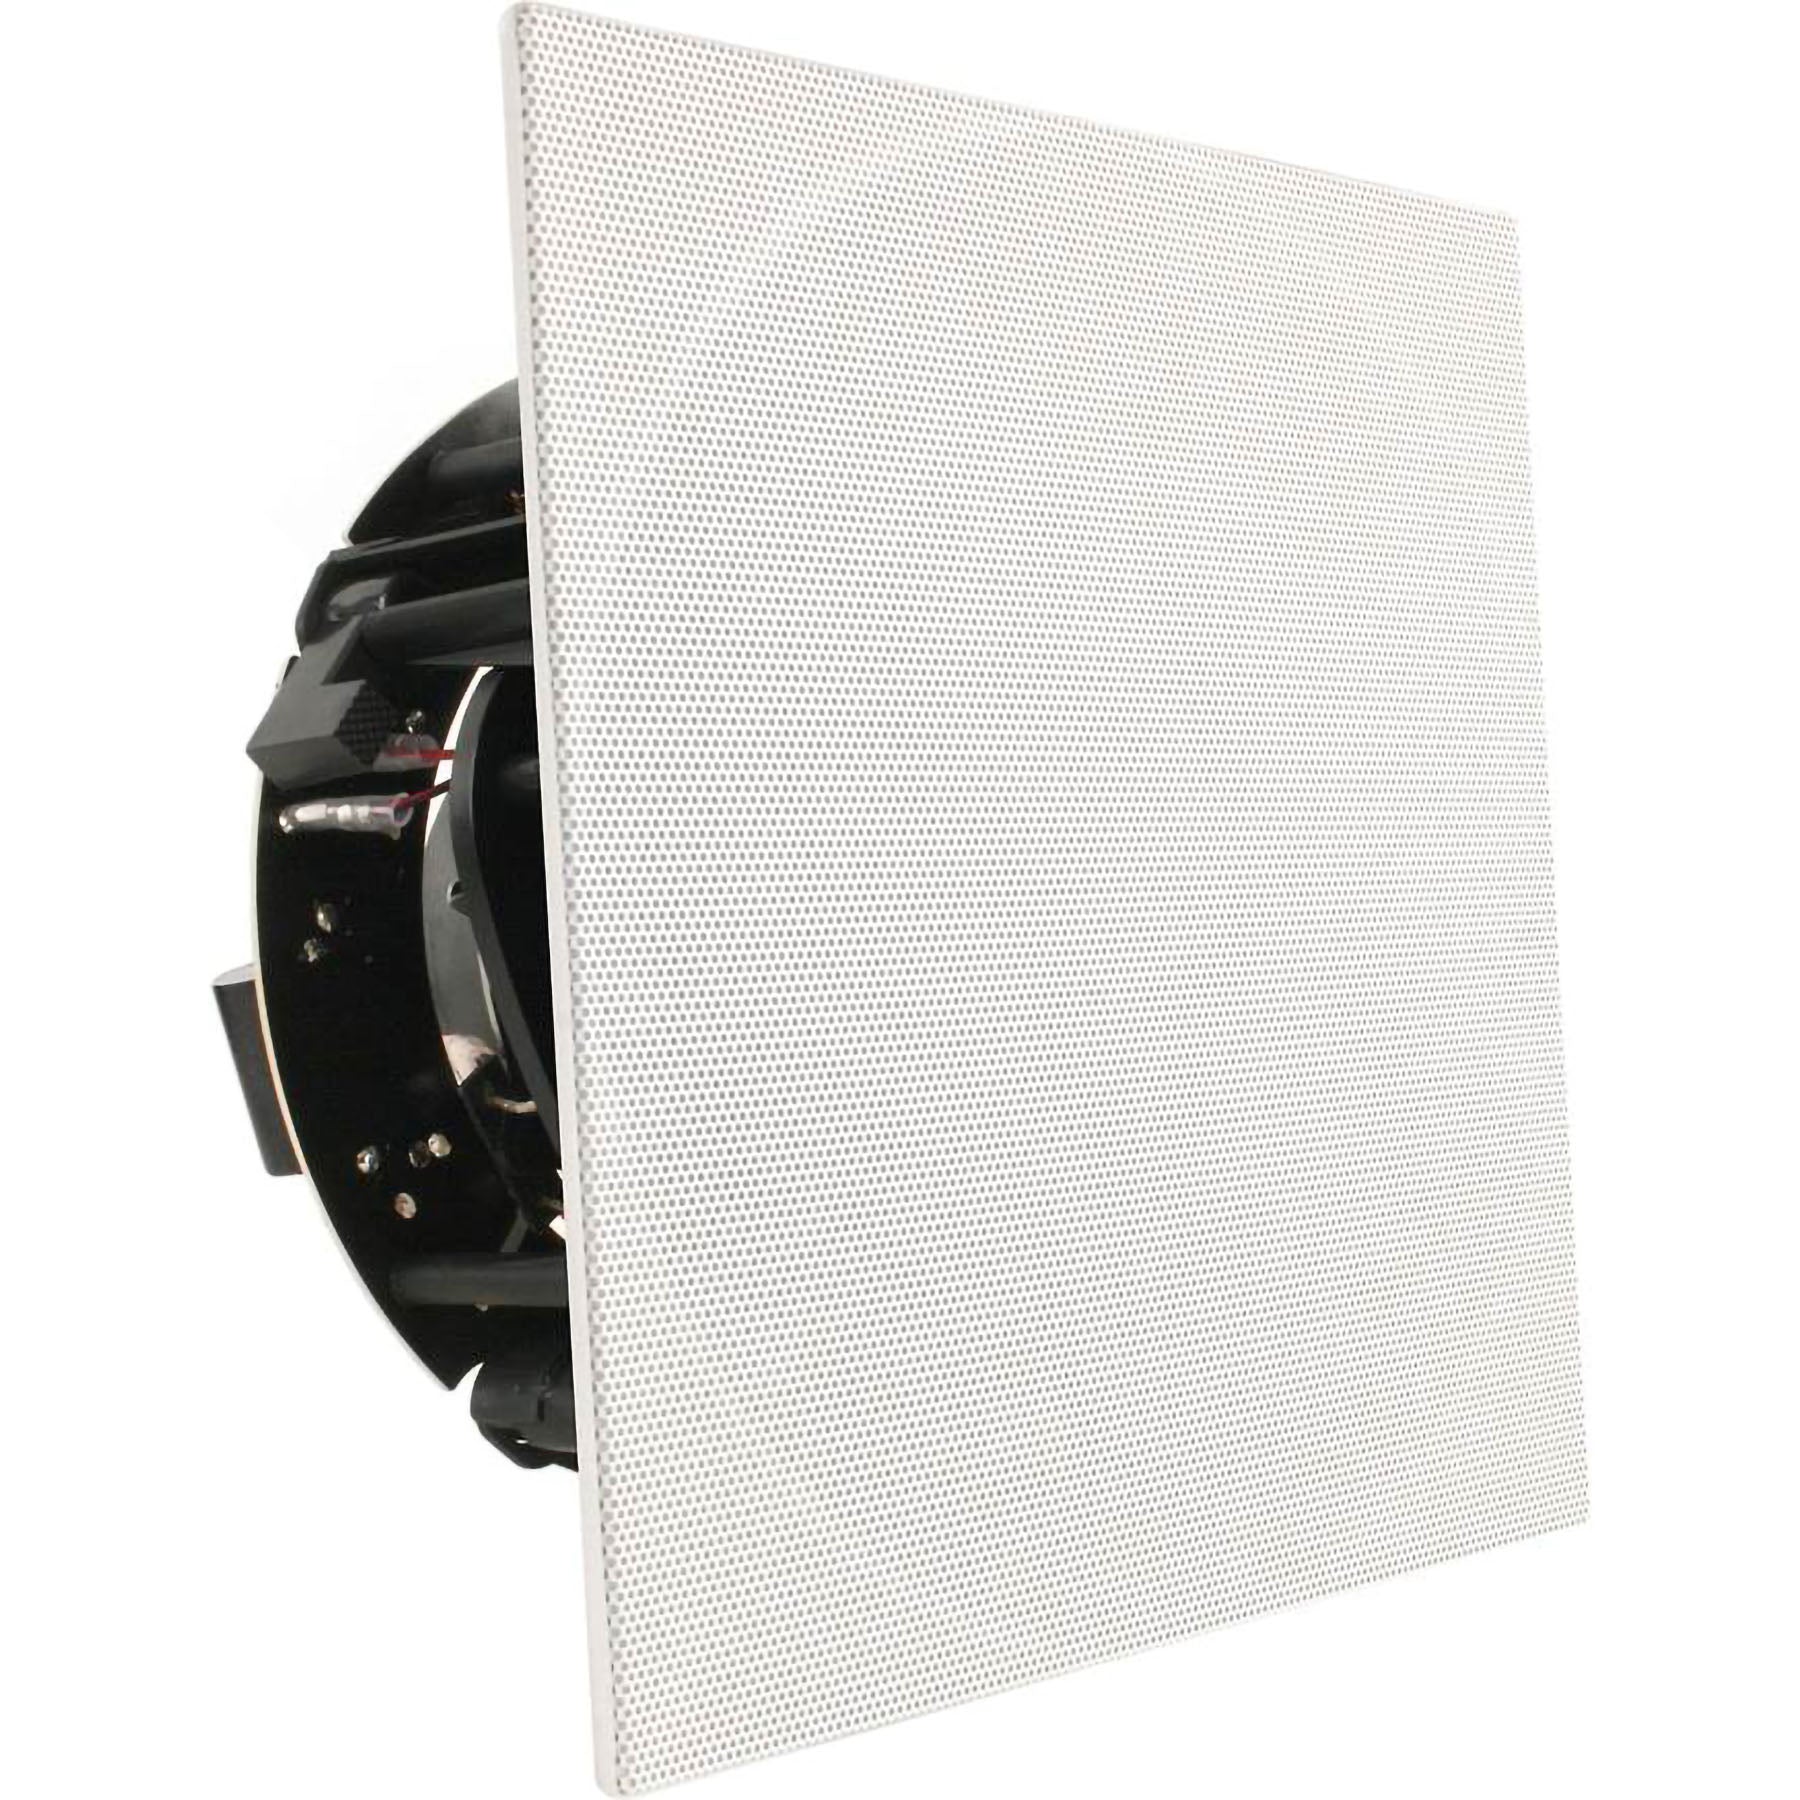 Revel Square Grill for 6.5" and 8" In-Ceiling Speakers